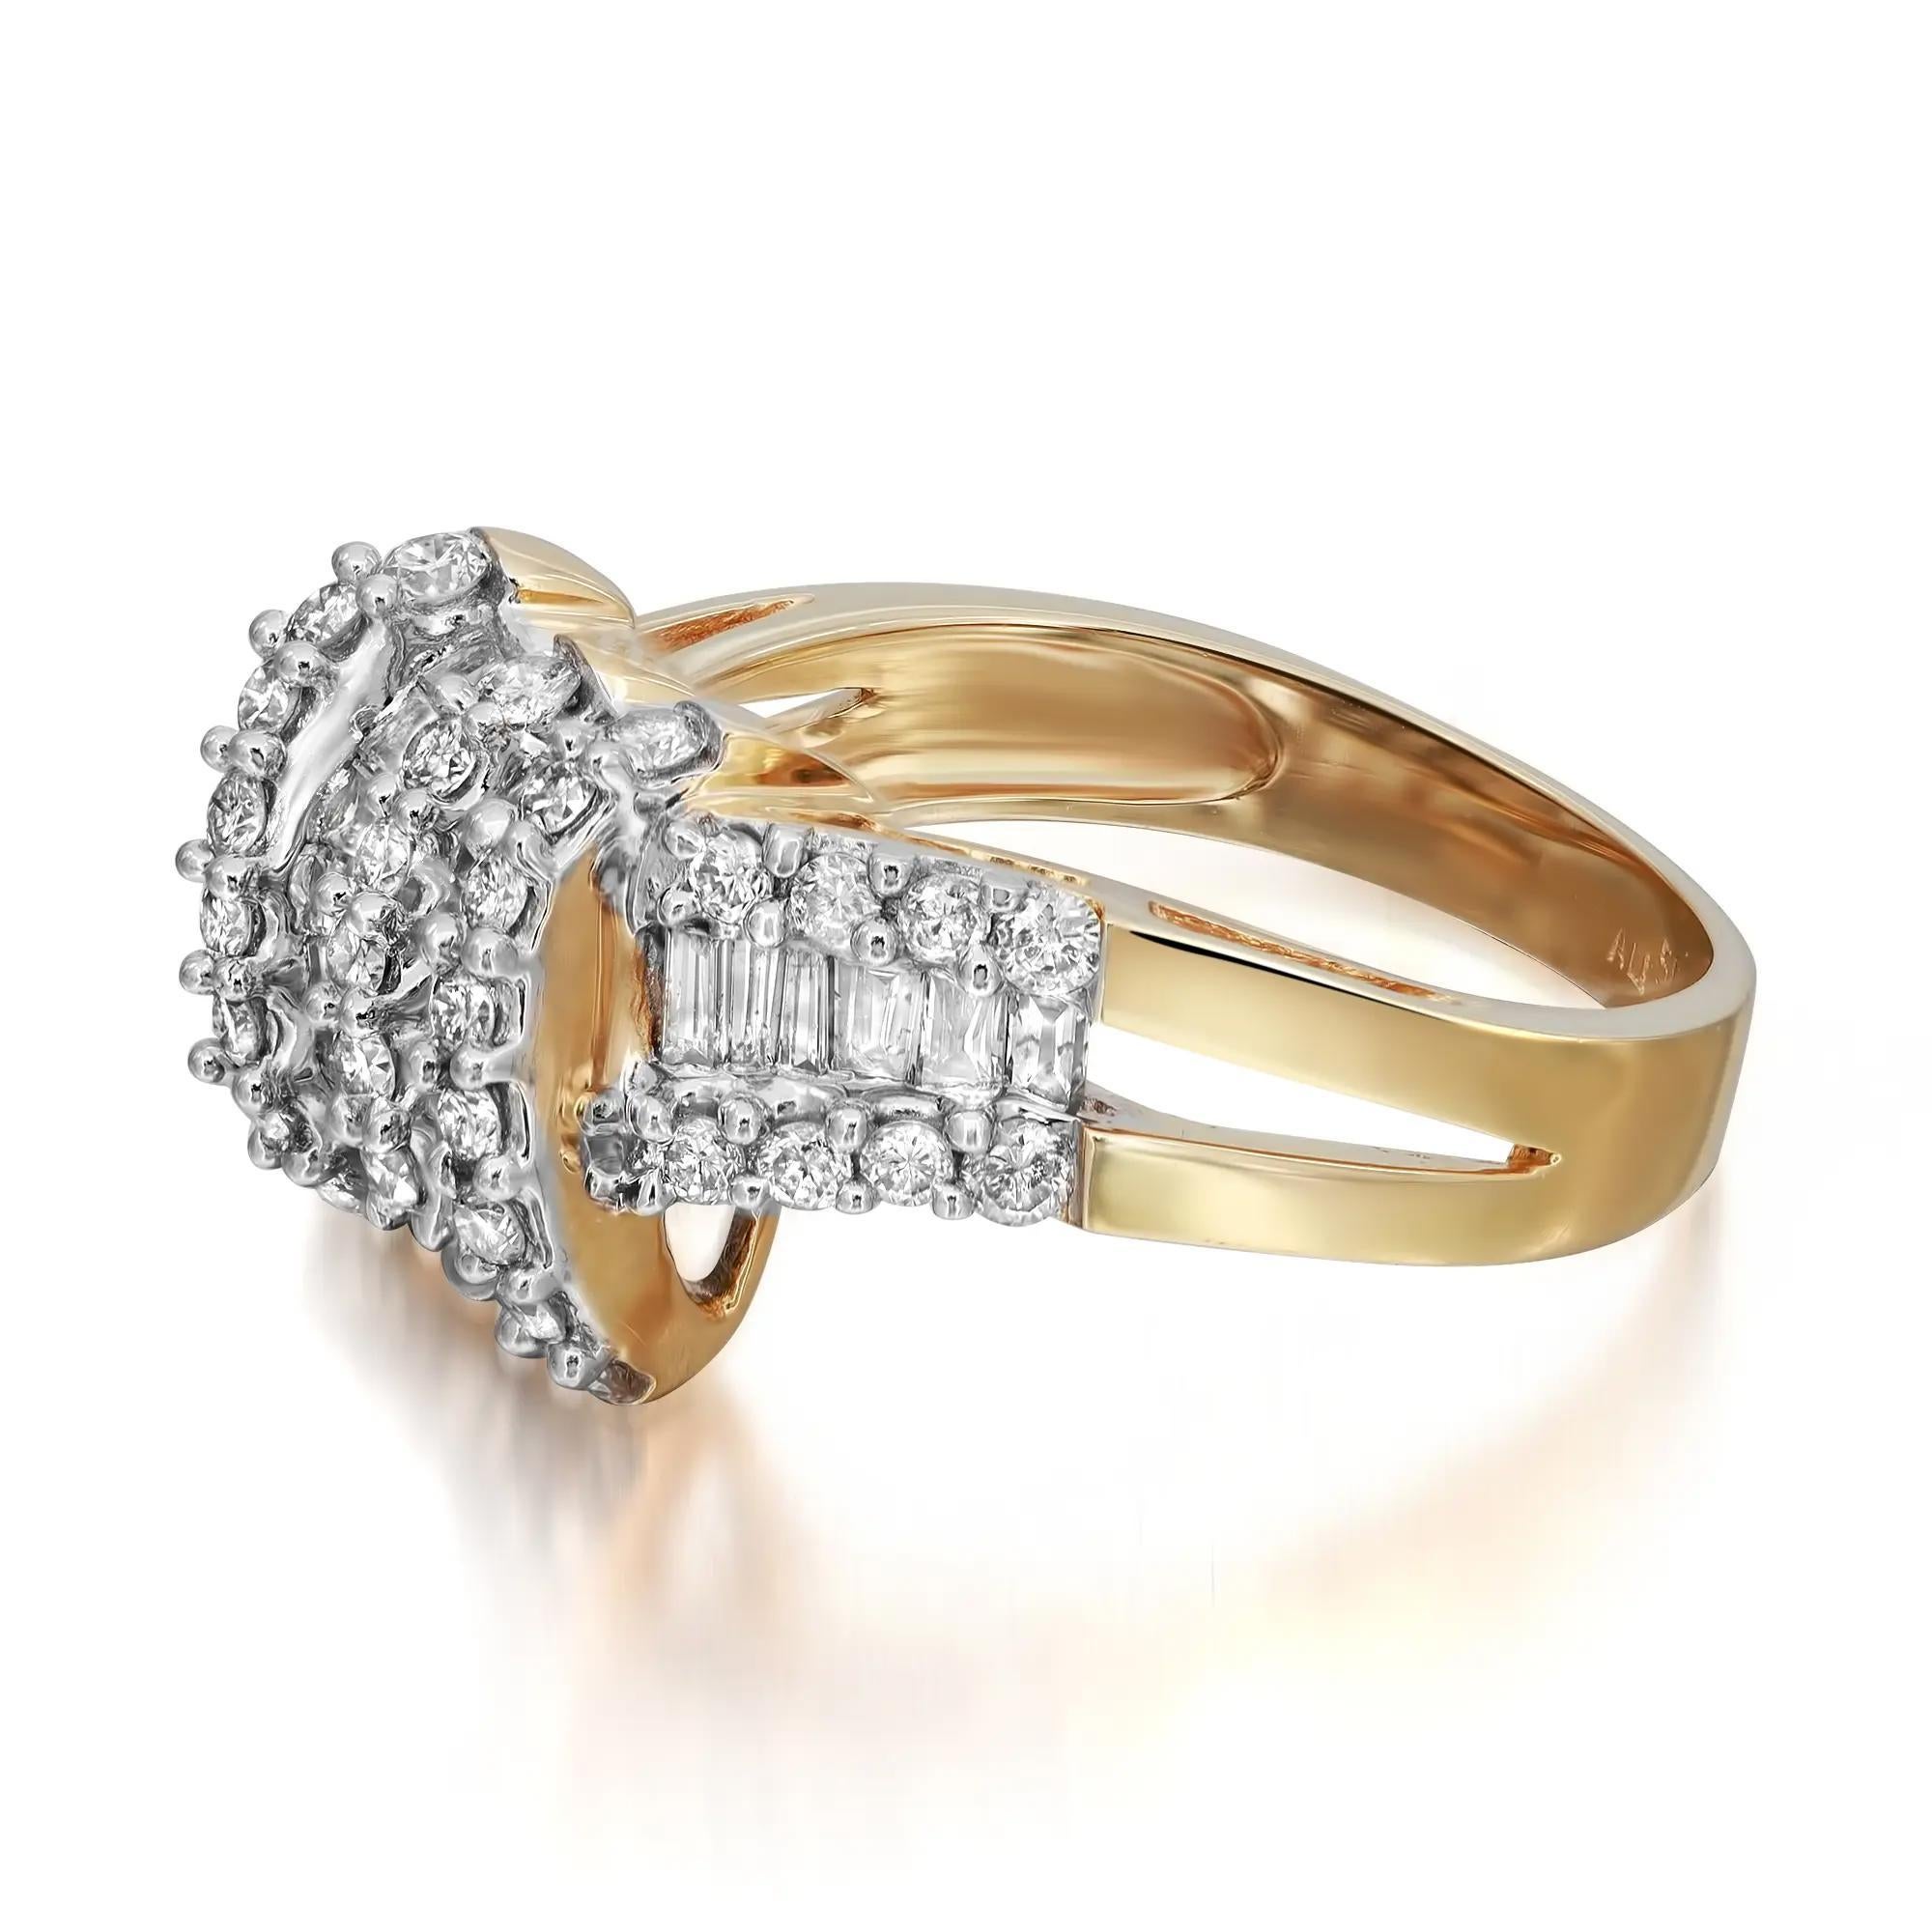 Presenting our Ladies' Cocktail Ring, adorned with 0.61Cttw Baguette and 0.61 Round Diamonds. This beautiful ring is set in 14K Yellow Gold. Ring size 8. Comes with a presentable gift box. 